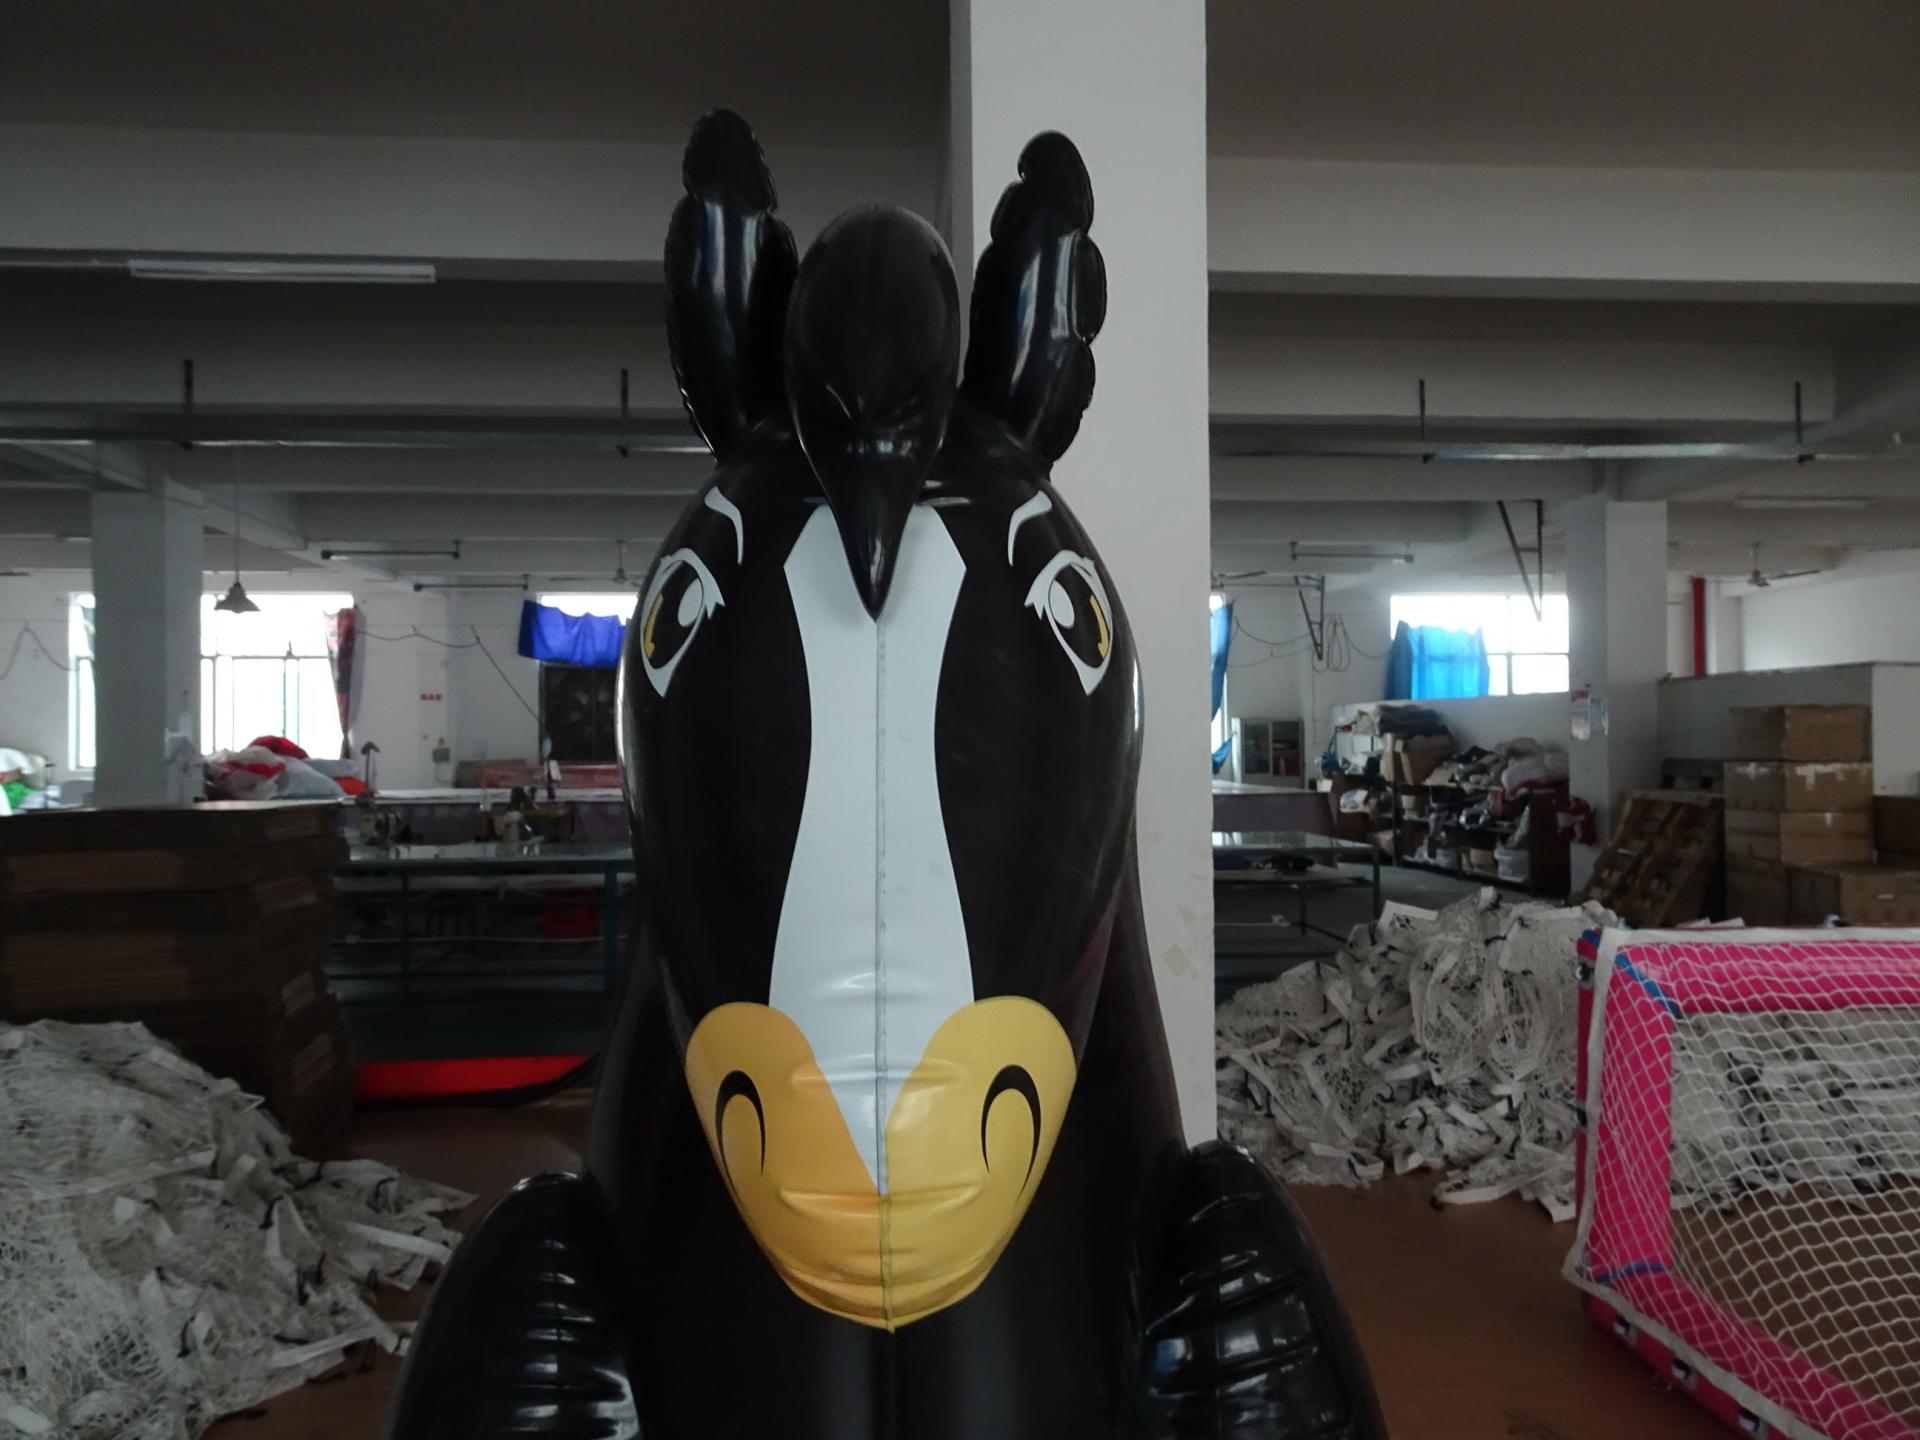 Customised Inflatable Horse Replica Cartoon Animals Figurines Toys For Party Decoration, Decors